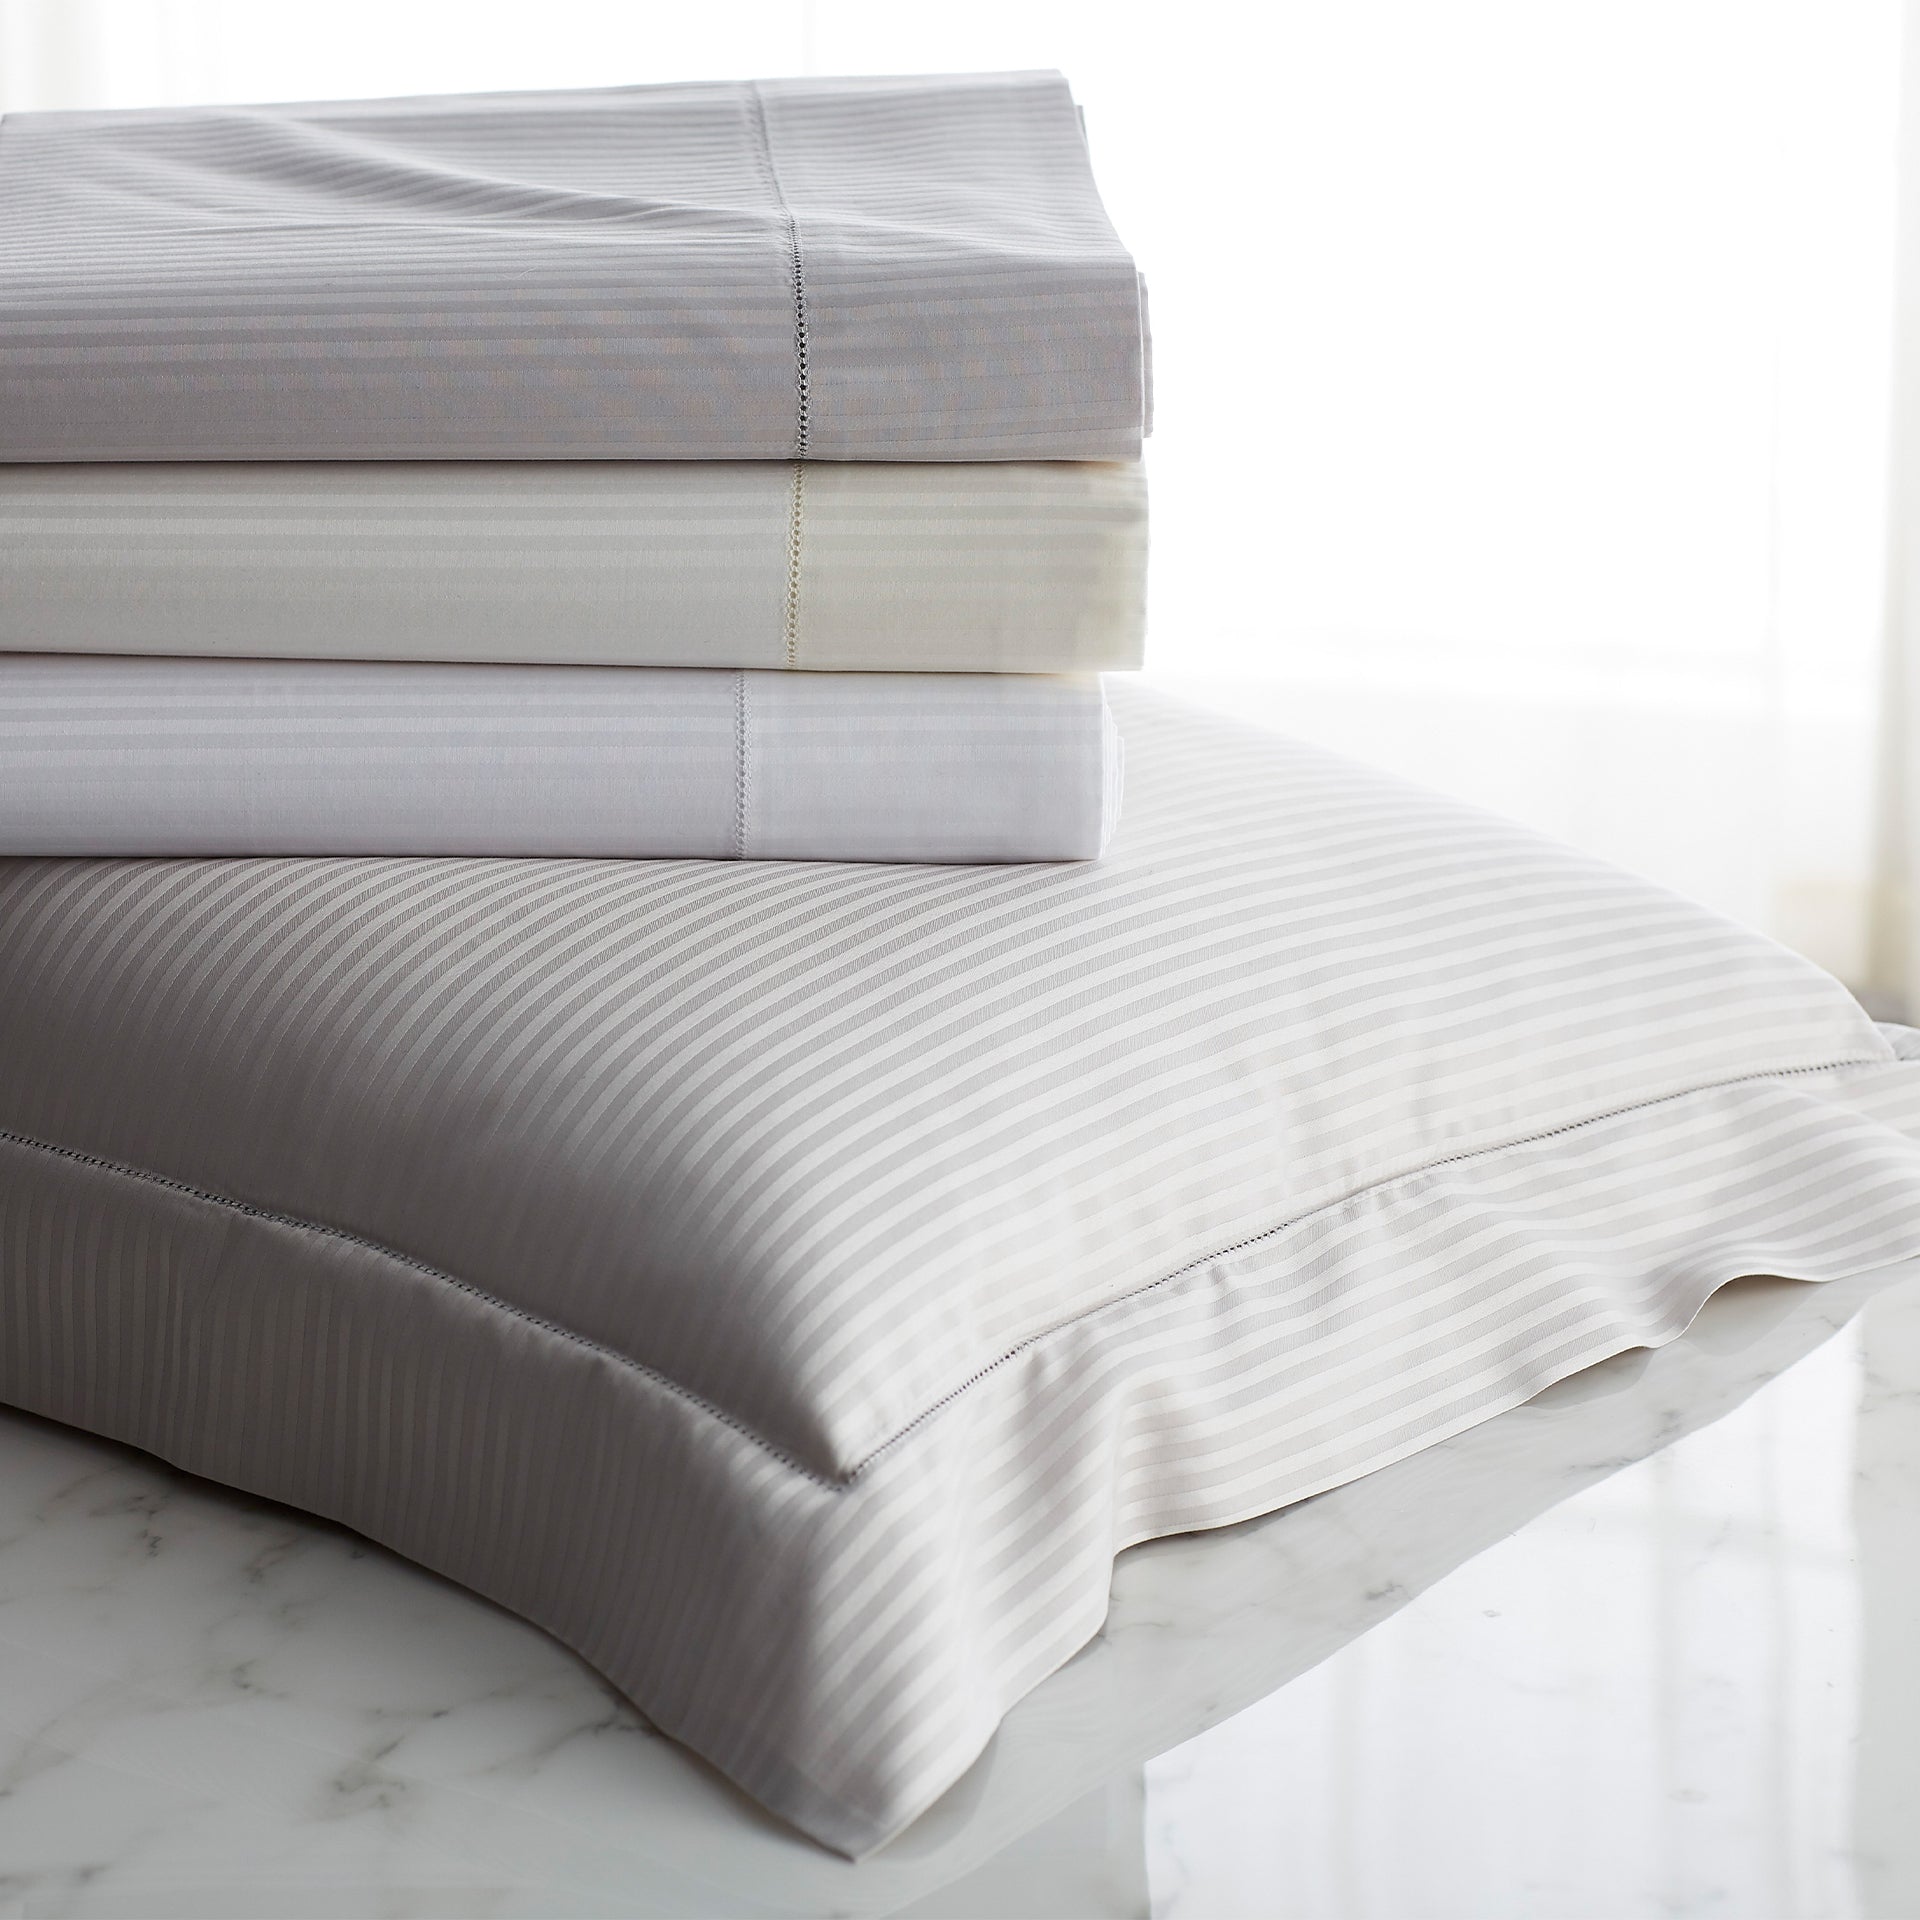 savoia stripe pillow sham shown with folded flat sheets in color ways-white, ivory and shadow